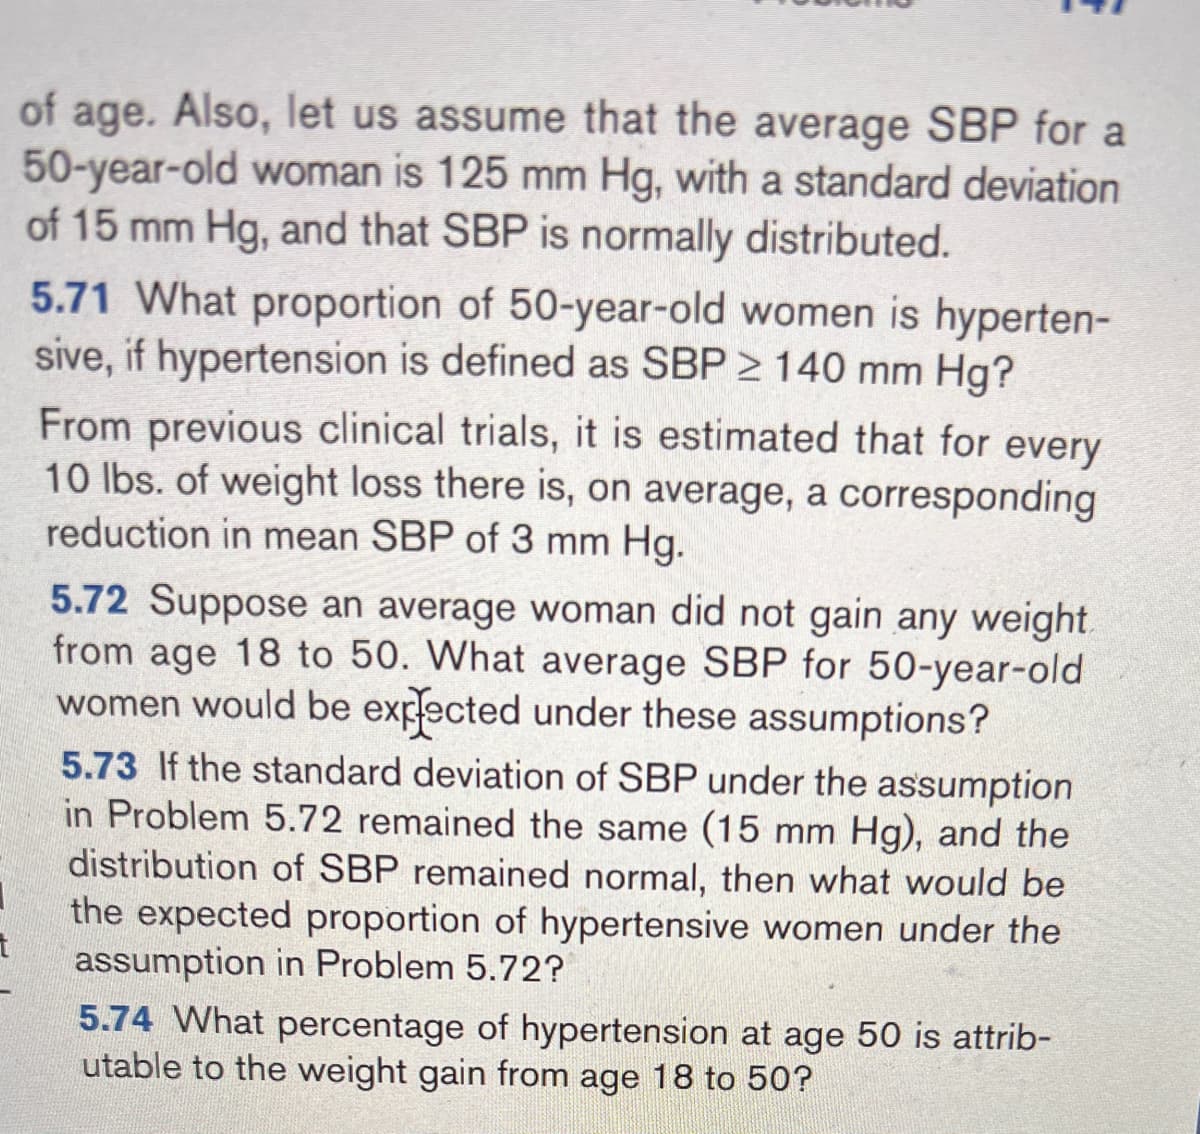 of age. Also, let us assume that the average SBP for a
50-year-old woman is 125 mm Hg, with a standard deviation
of 15 mm Hg, and that SBP is normally distributed.
5.71 What proportion of 50-year-old women is hyperten-
sive, if hypertension is defined as SBP 2 140 mm Hg?
From previous clinical trials, it is estimated that for every
10 lbs. of weight loss there is, on average, a corresponding
reduction in mean SBP of 3 mm Hg.
5.72 Suppose an average woman did not gain any weight
from age 18 to 50. What average SBP for 50-year-old
women would be expected under these assumptions?
5.73 If the standard deviation of SBP under the assumption
in Problem 5.72 remained the same (15 mm Hg), and the
distribution of SBP remained normal, then what would be
the expected proportion of hypertensive women under the
assumption in Problem 5.72?
5.74 What percentage of hypertension at age 50 is attrib-
utable to the weight gain from age 18 to 50?